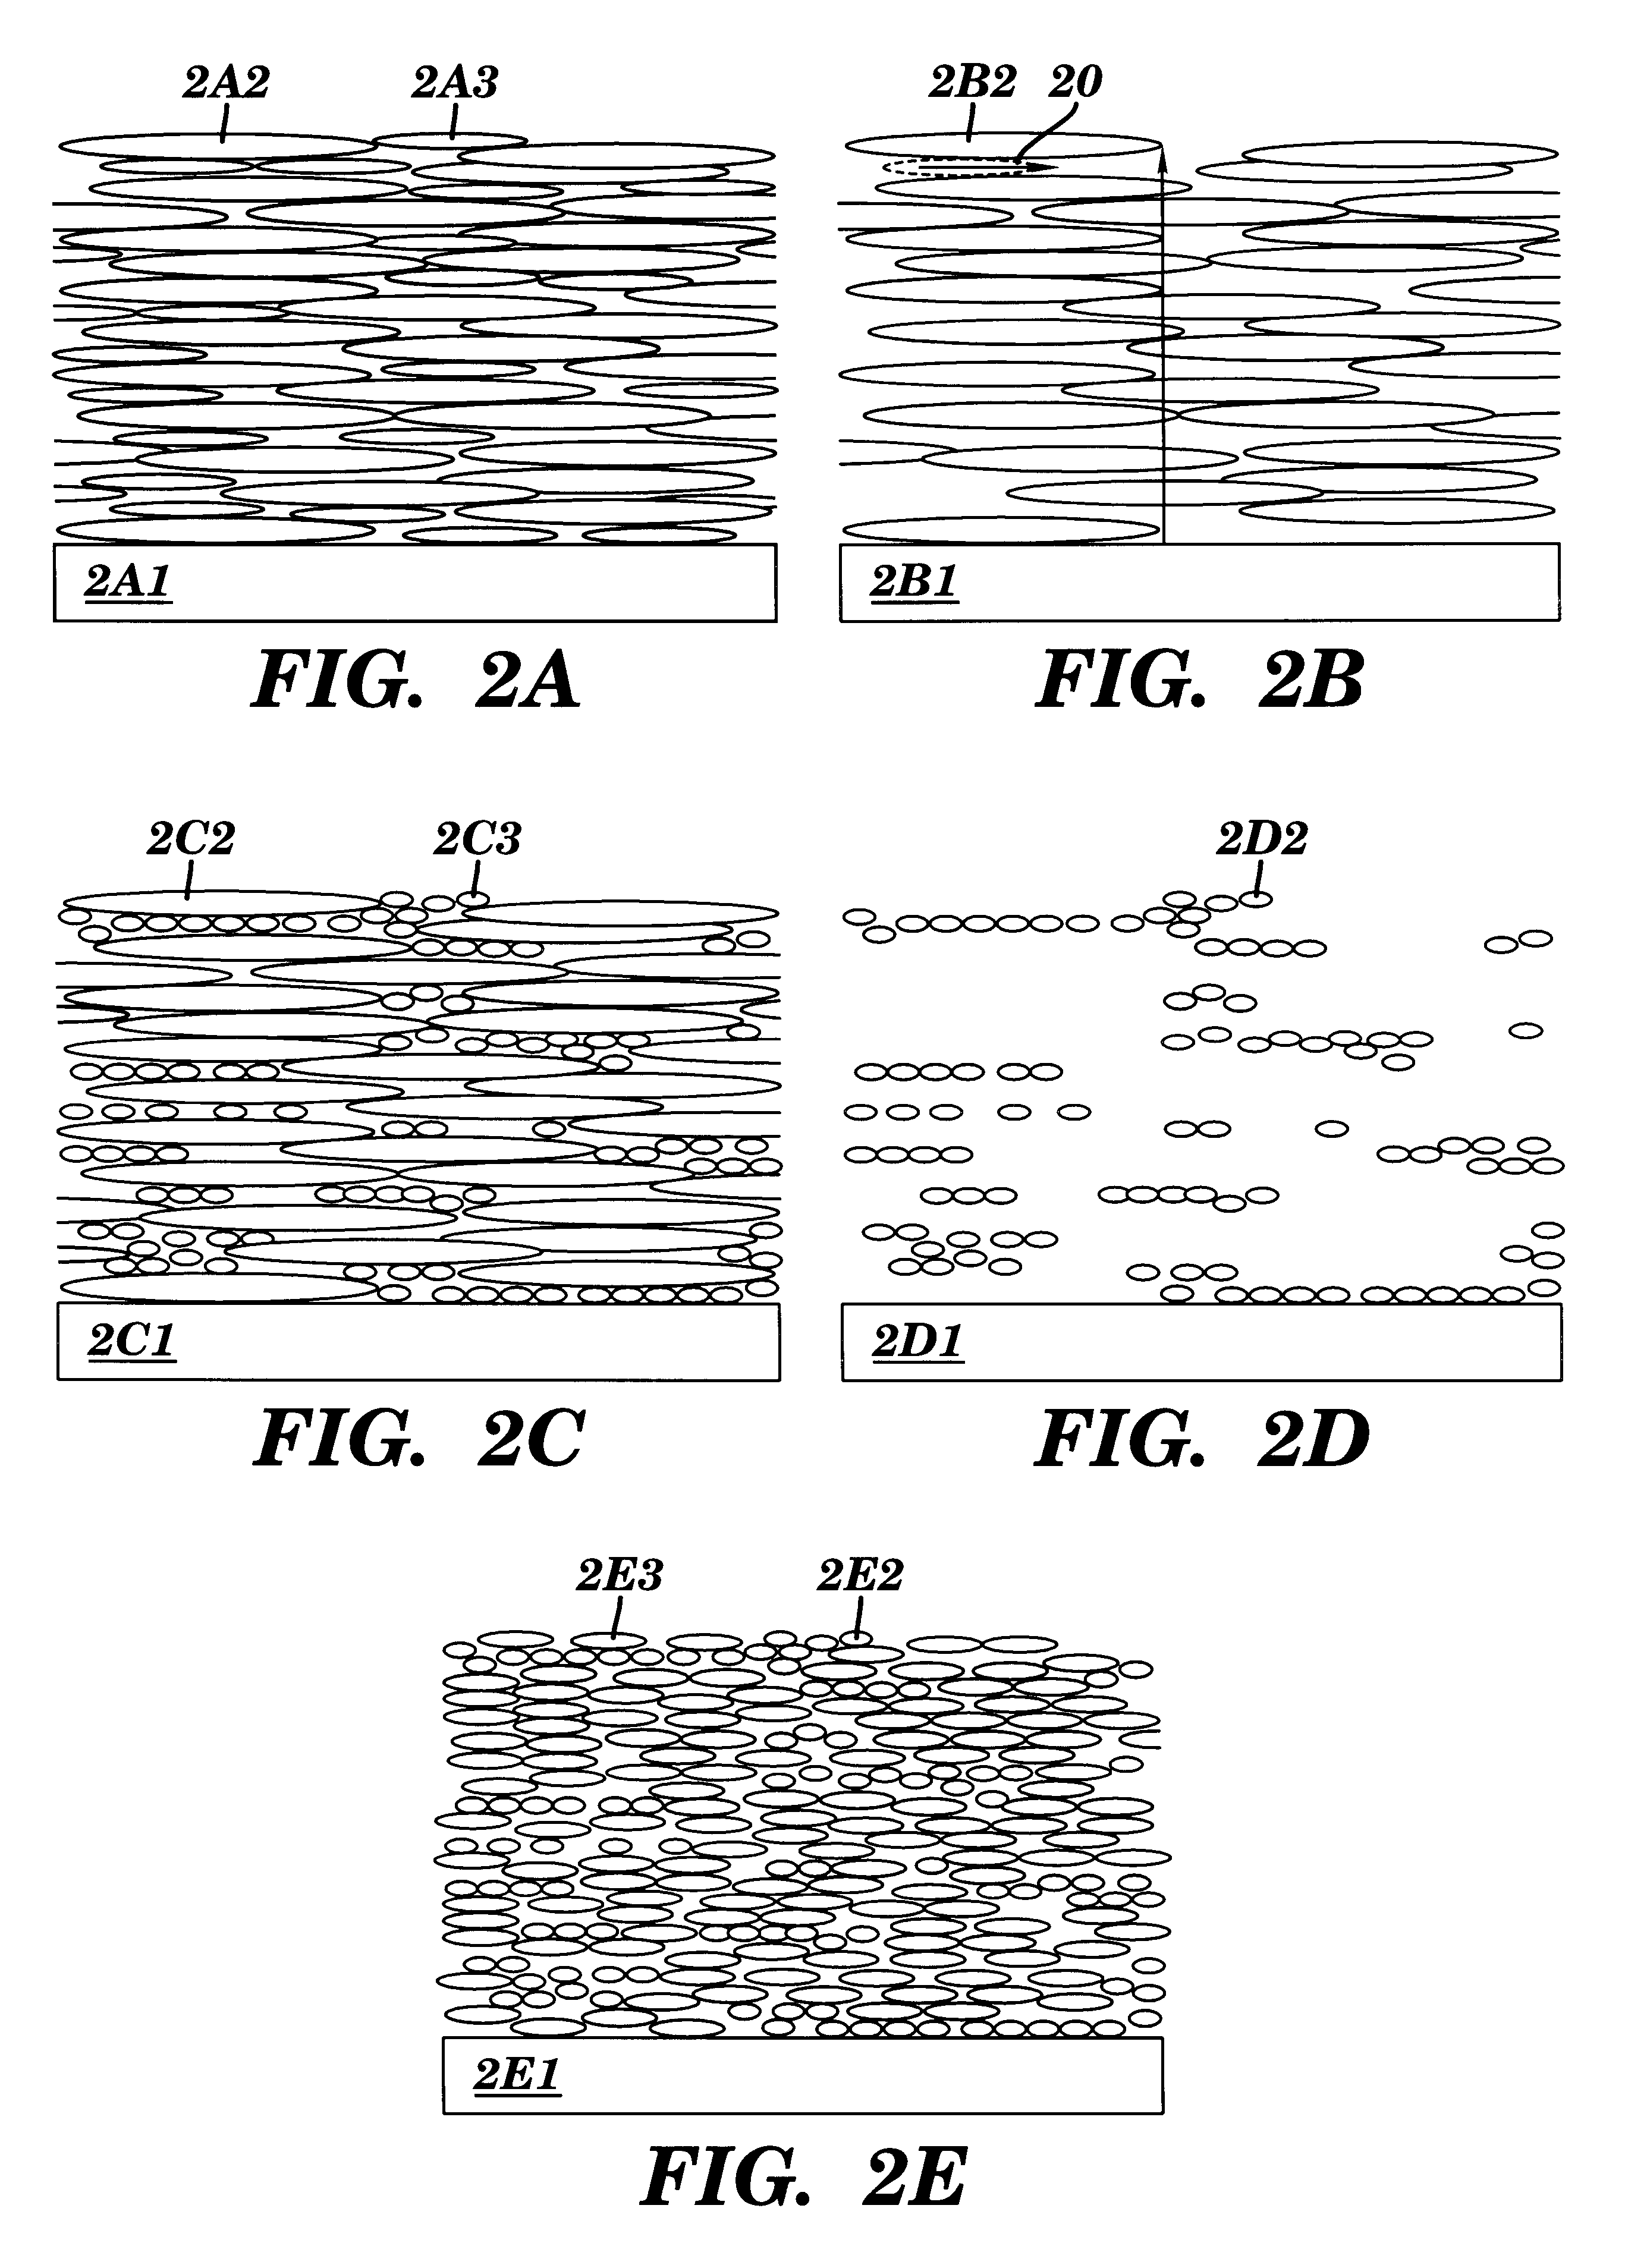 Composite nonlinear optical film, method of producing the same and applications of the same